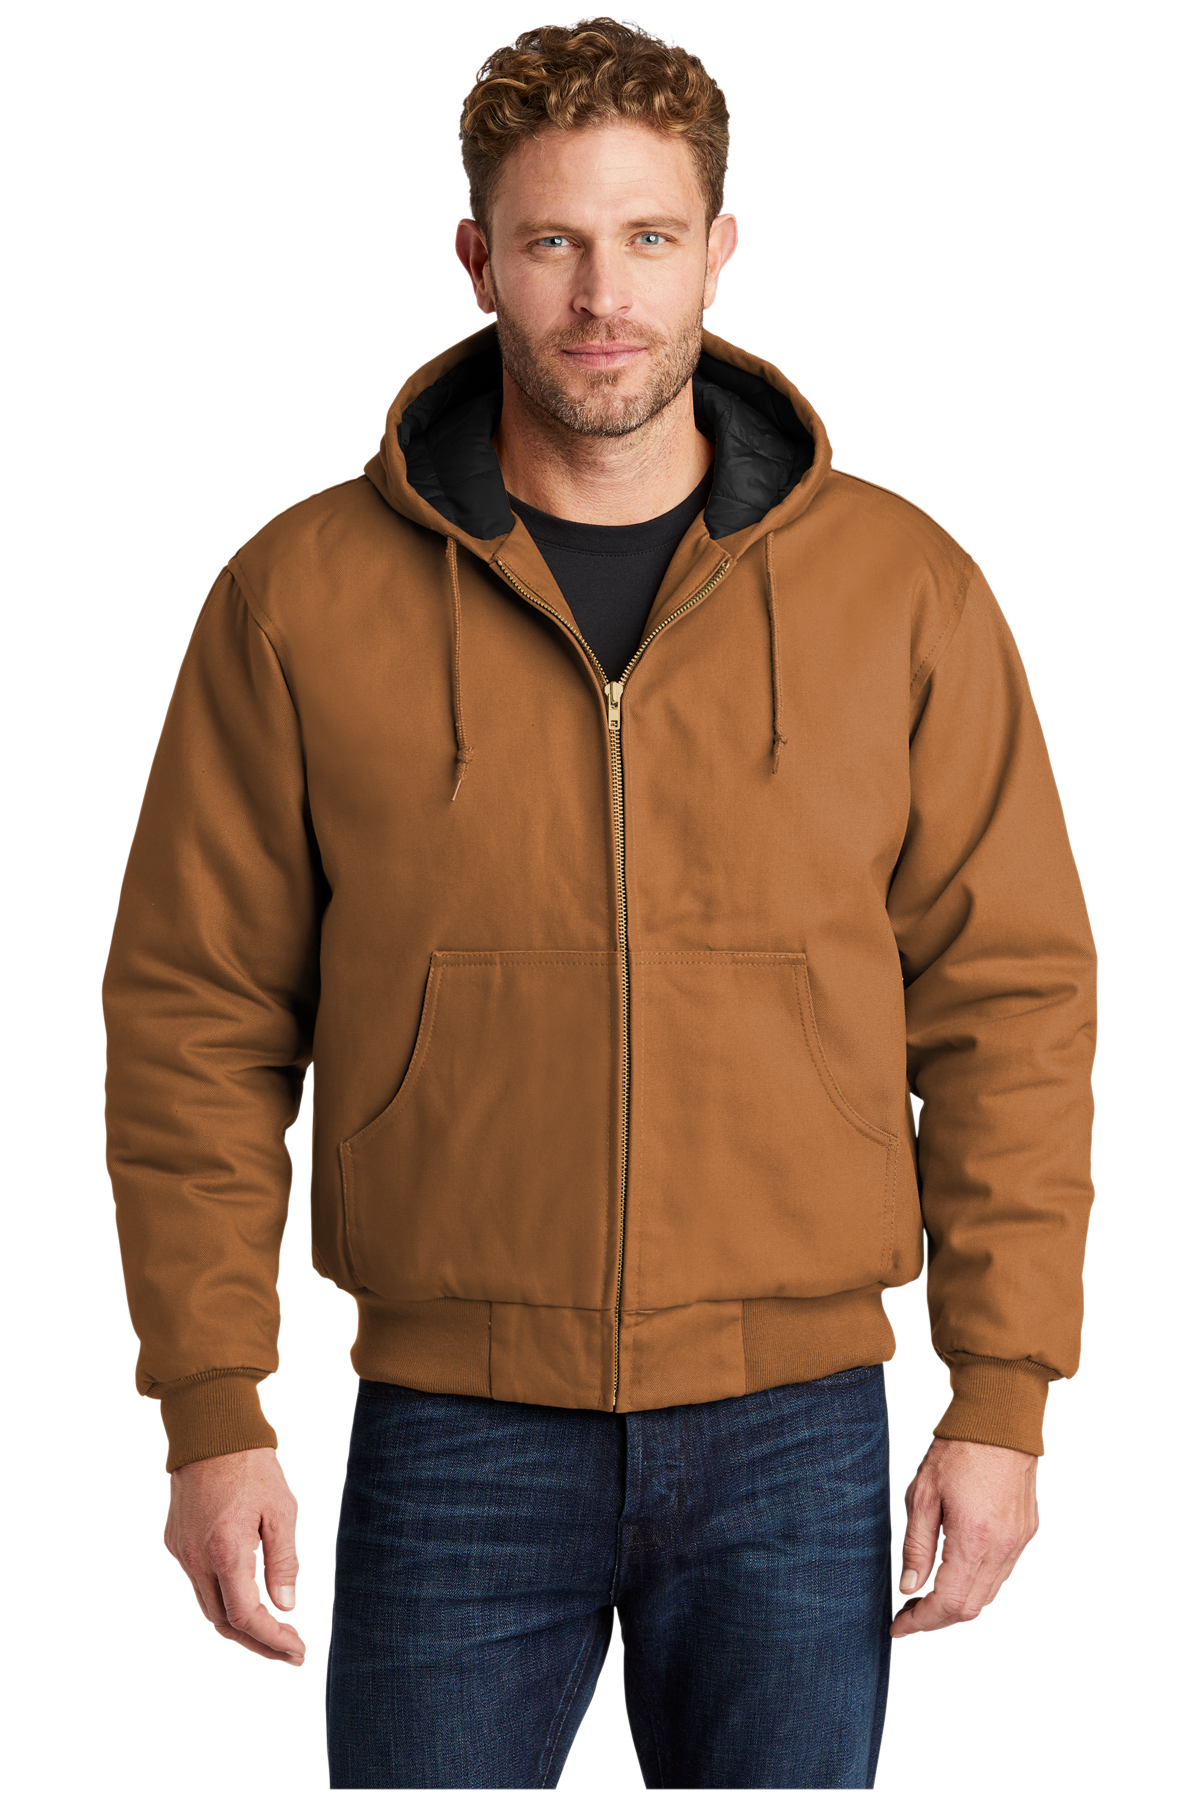 Cornerstone Jackets: Quality, Style, and Durability for Every Adventure插图1